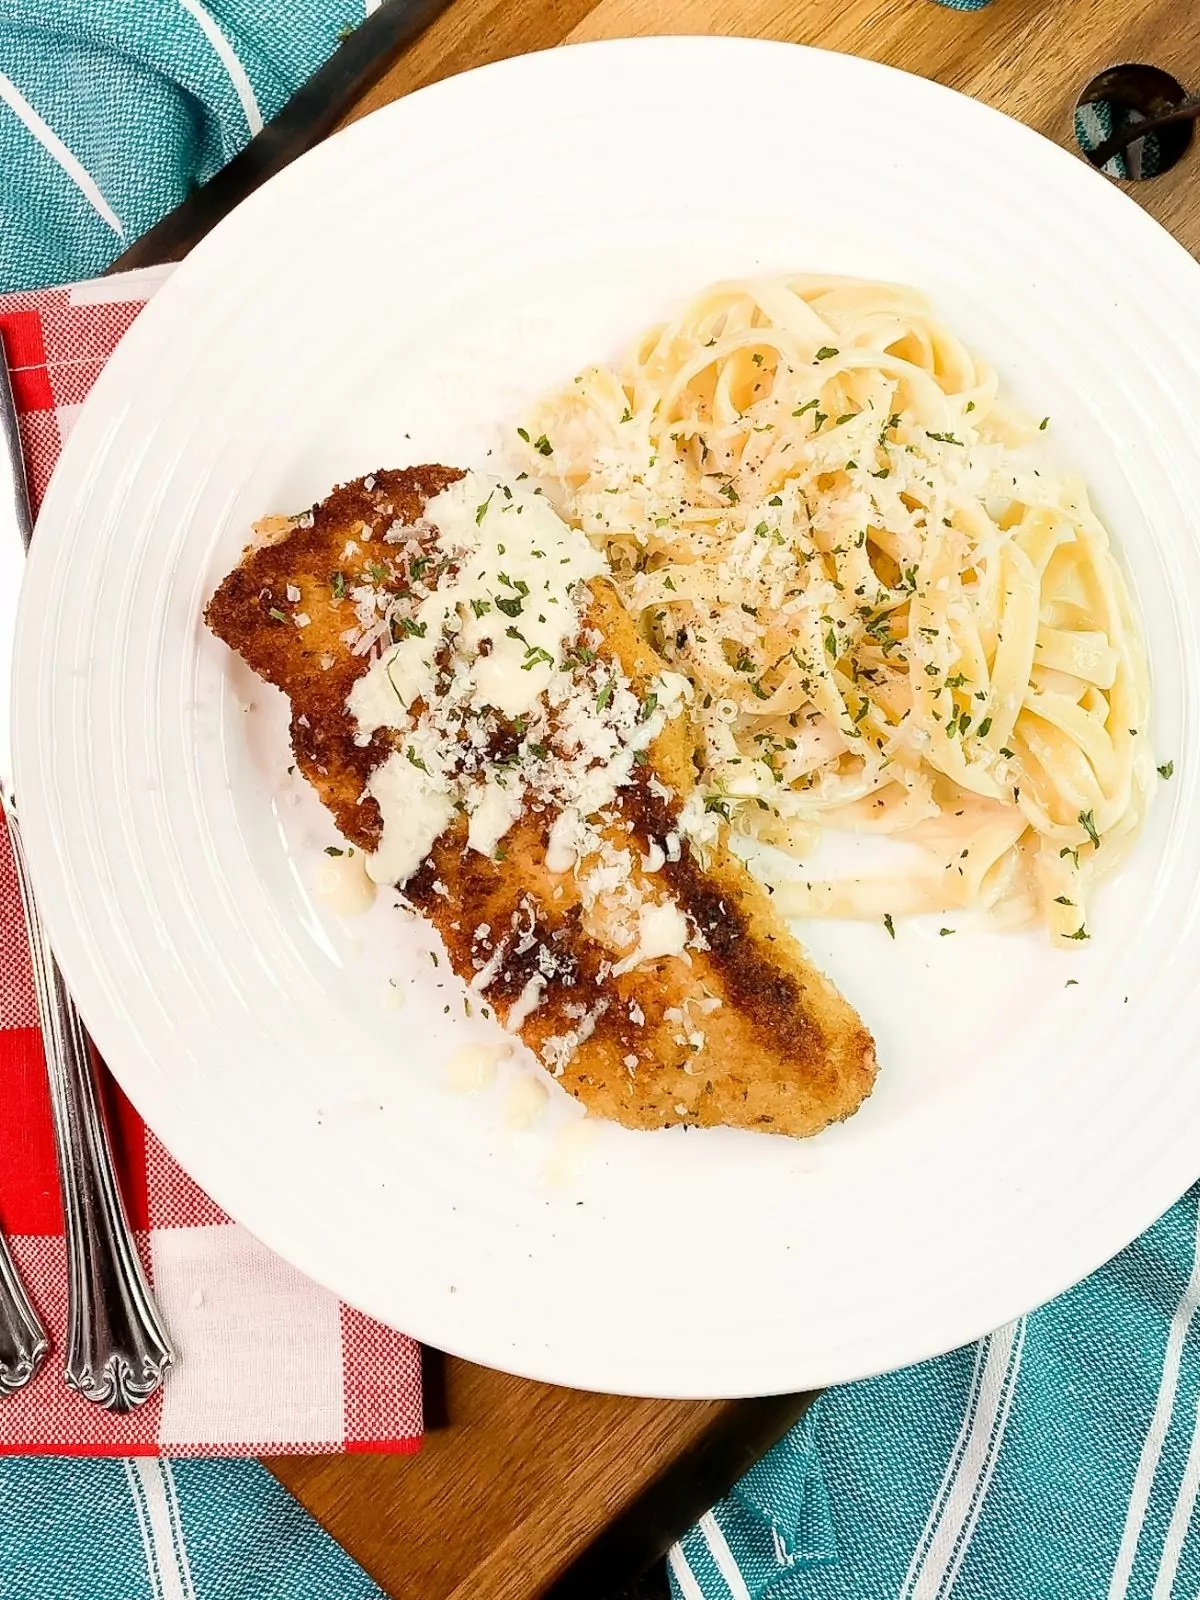 Chicken Cutlets Parmesan Recipe with pasta and Alfredo sauce on plate with fork and knife.